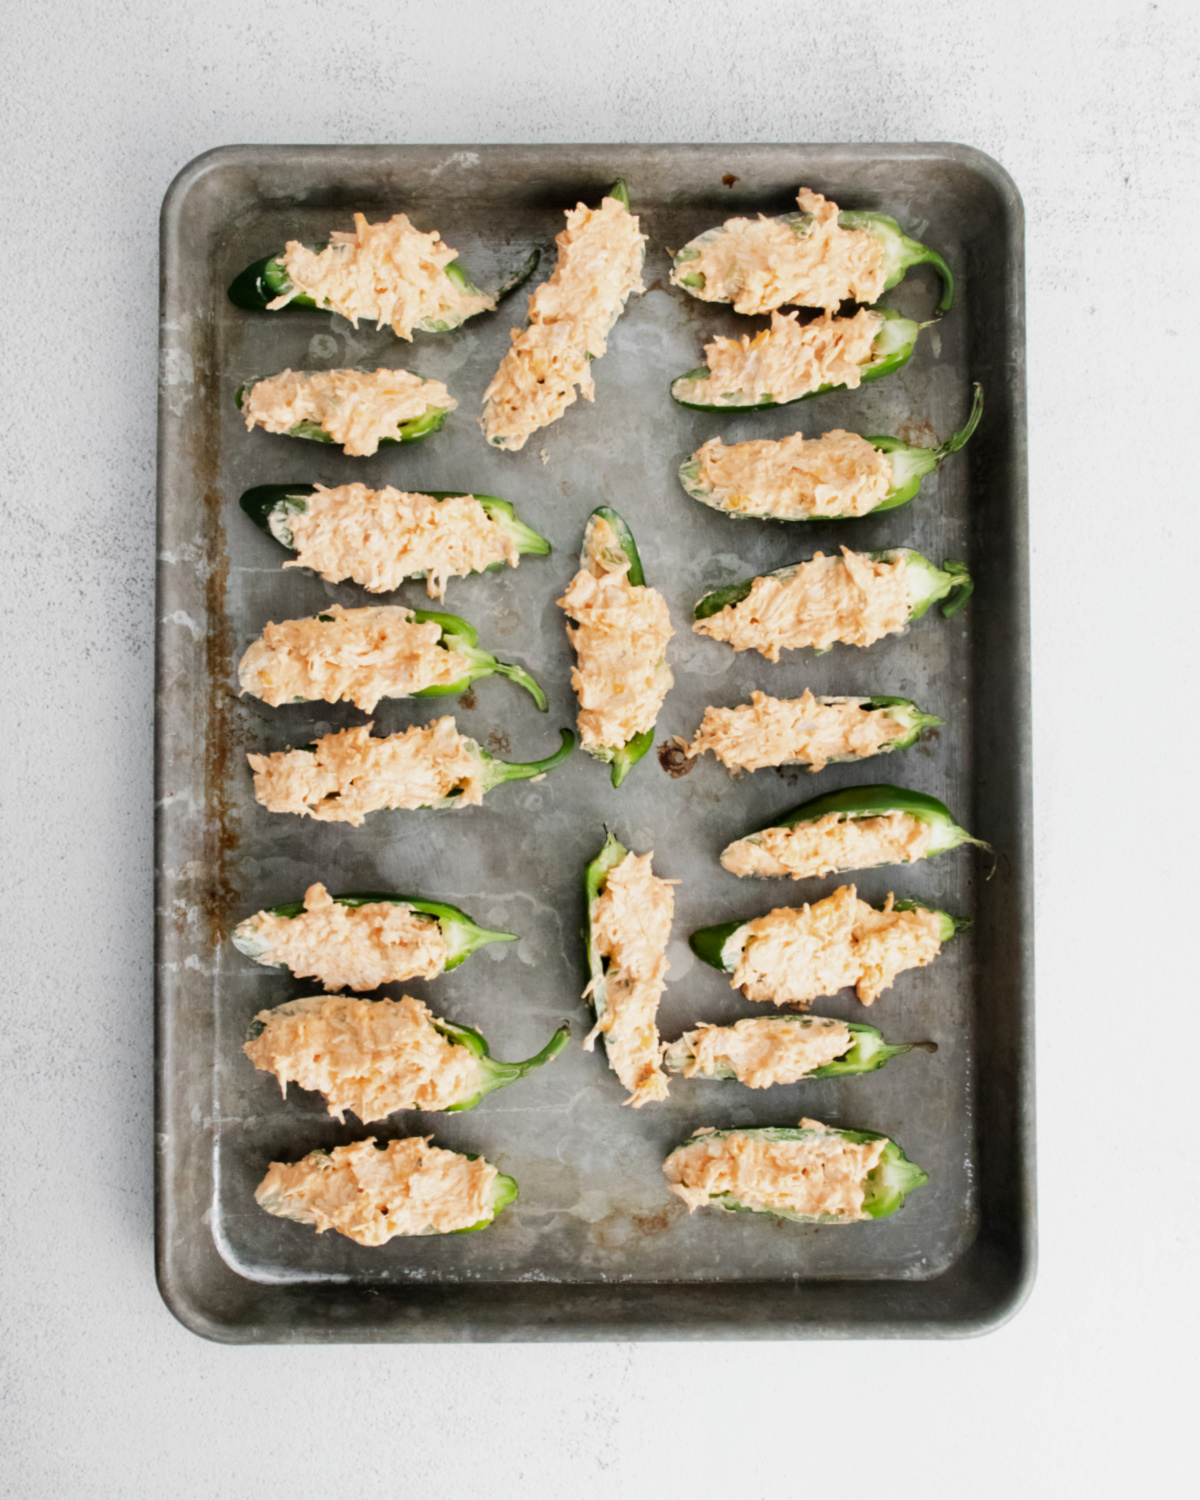 Buffalo chicken jalapeno poppers on a baking sheet ready to be baked